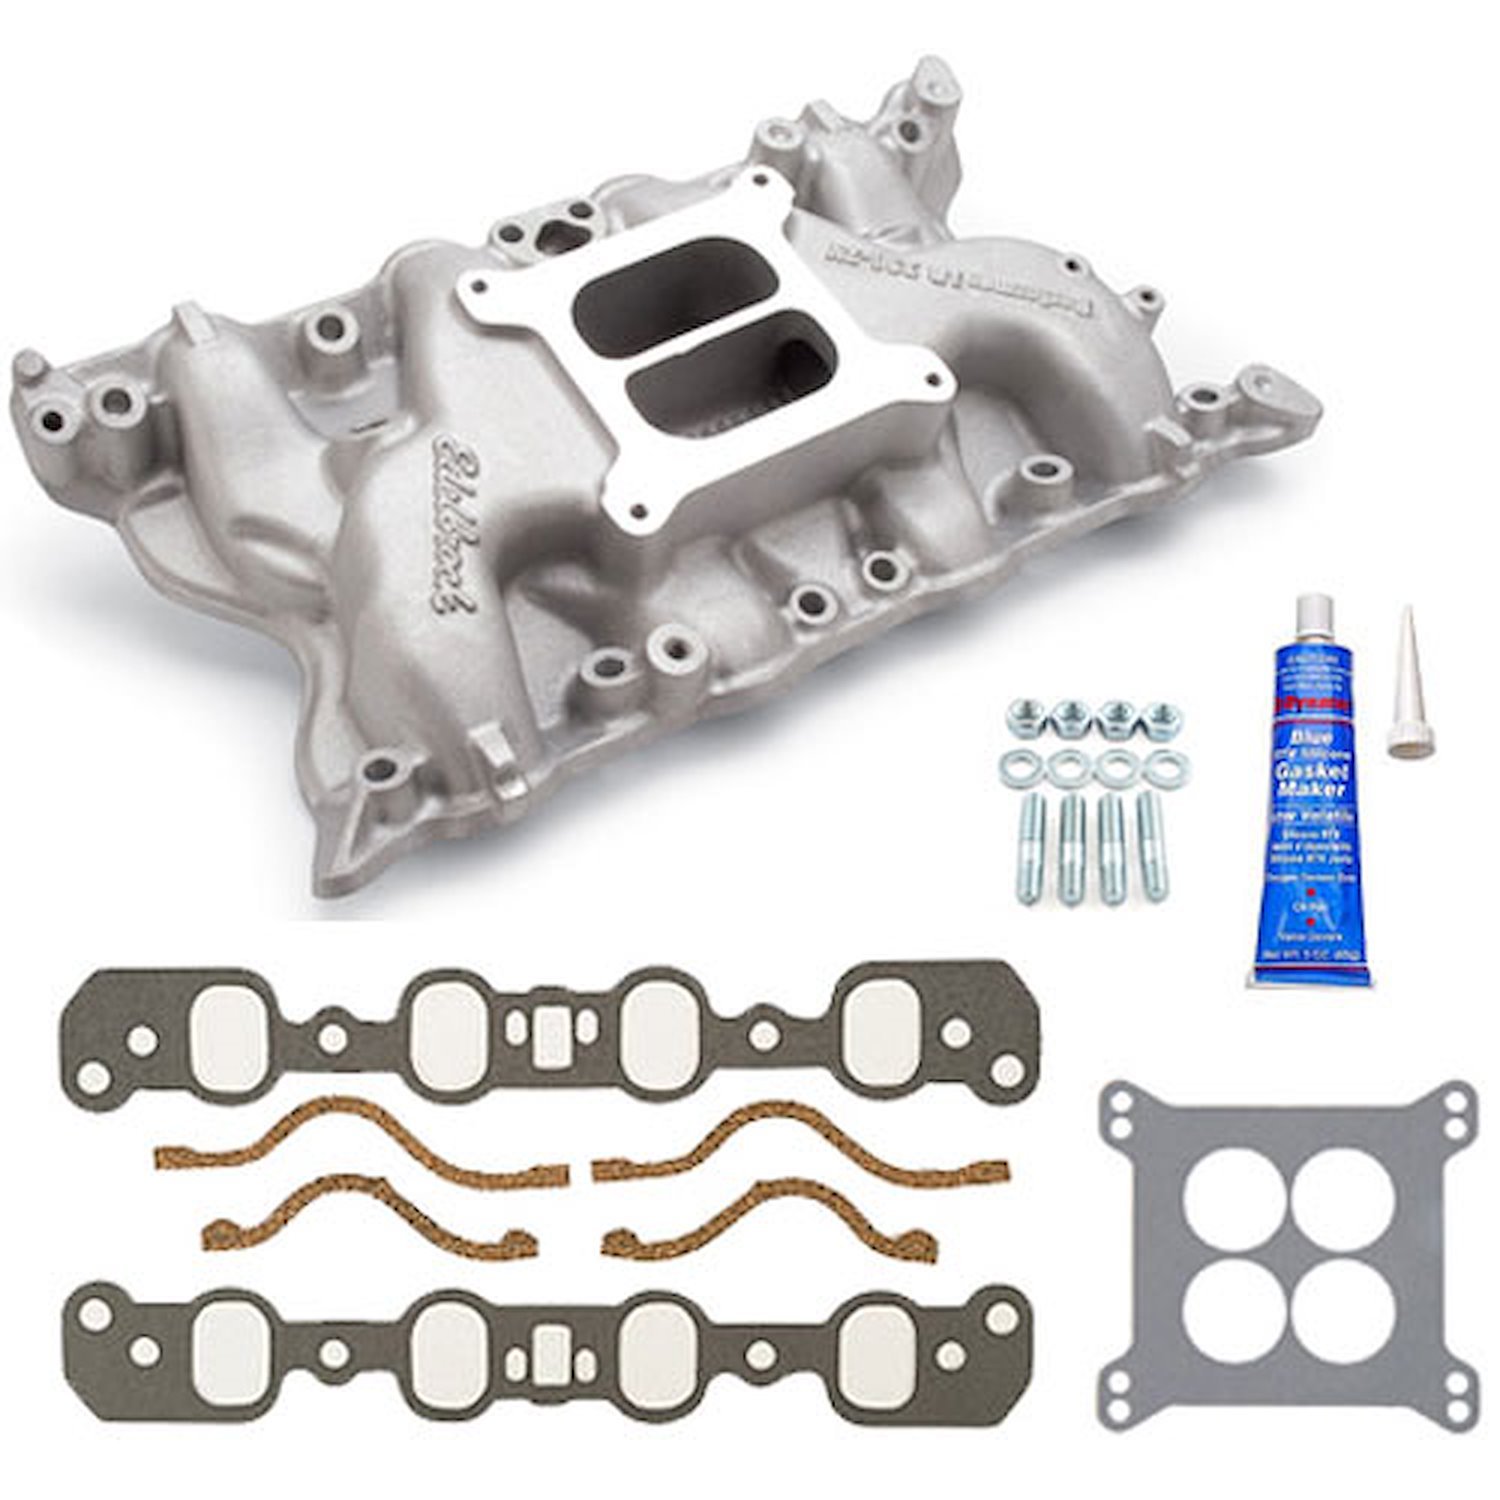 Performer 351-2V Ford Cleveland Intake Manifold with Installation Kit